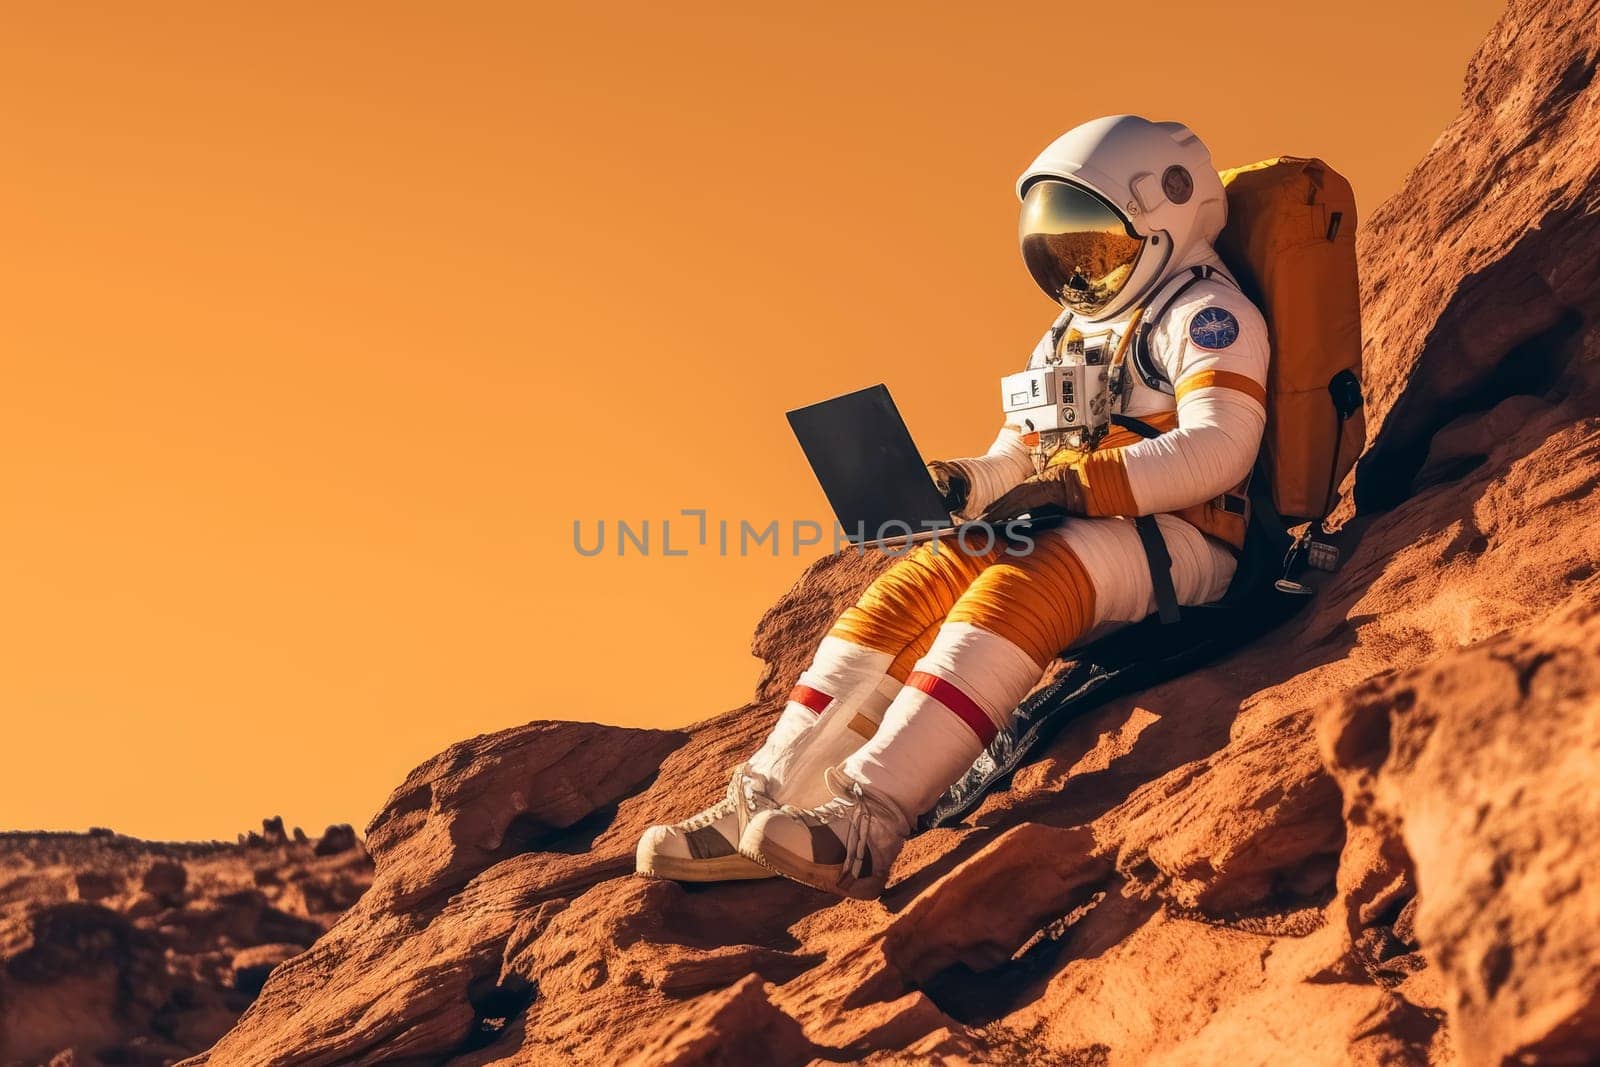 Astronaut with laptop sitting on rocky Mars-like terrain. Conceptual space exploration scene. Science fiction book cover design. Mars colonization and space travel concept